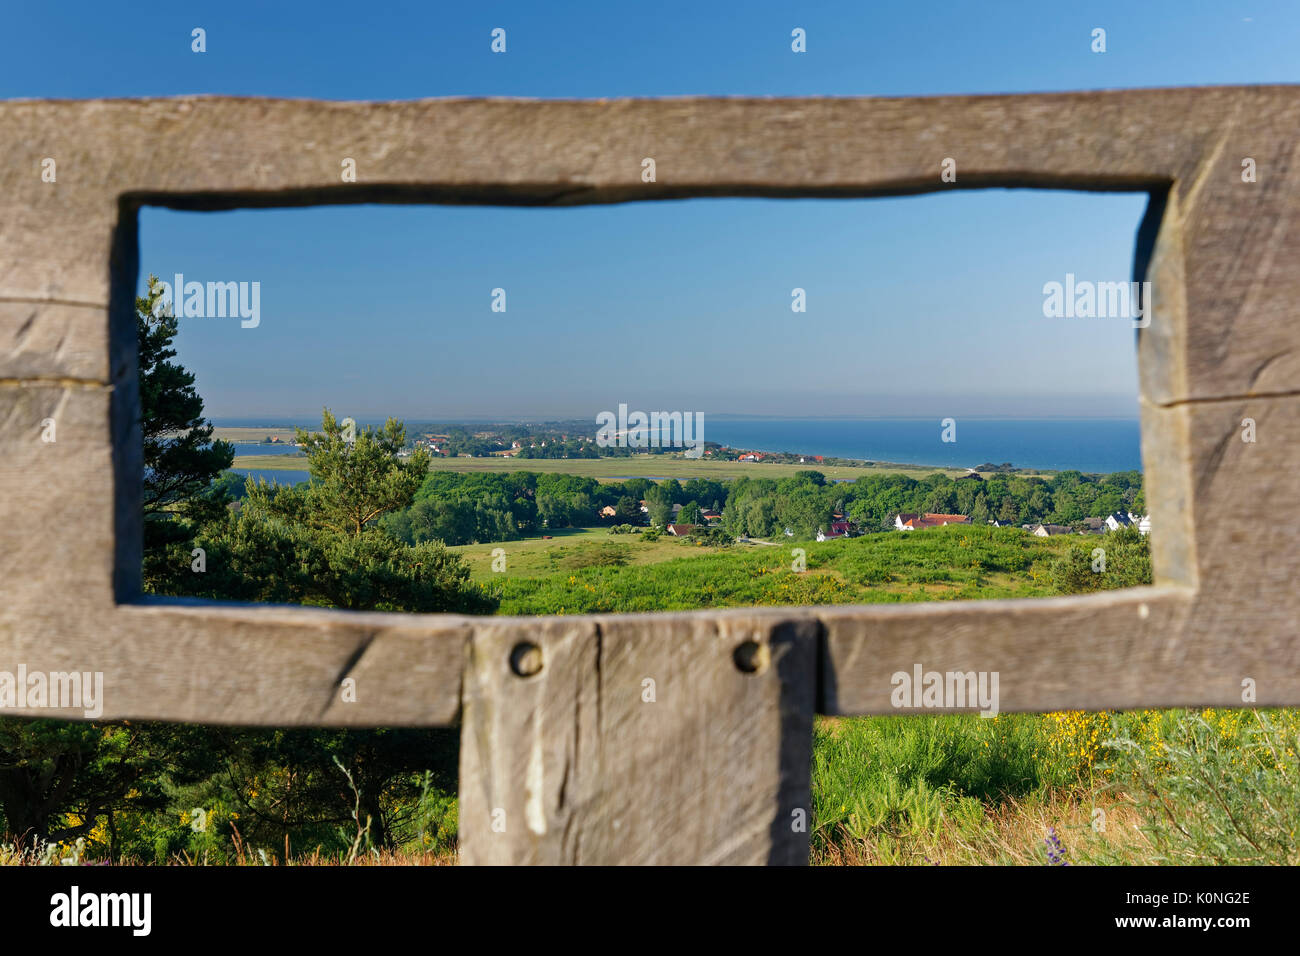 Germany, Mecklenburg-Western Pomerania, View of Hiddensee through wooden frame Stock Photo